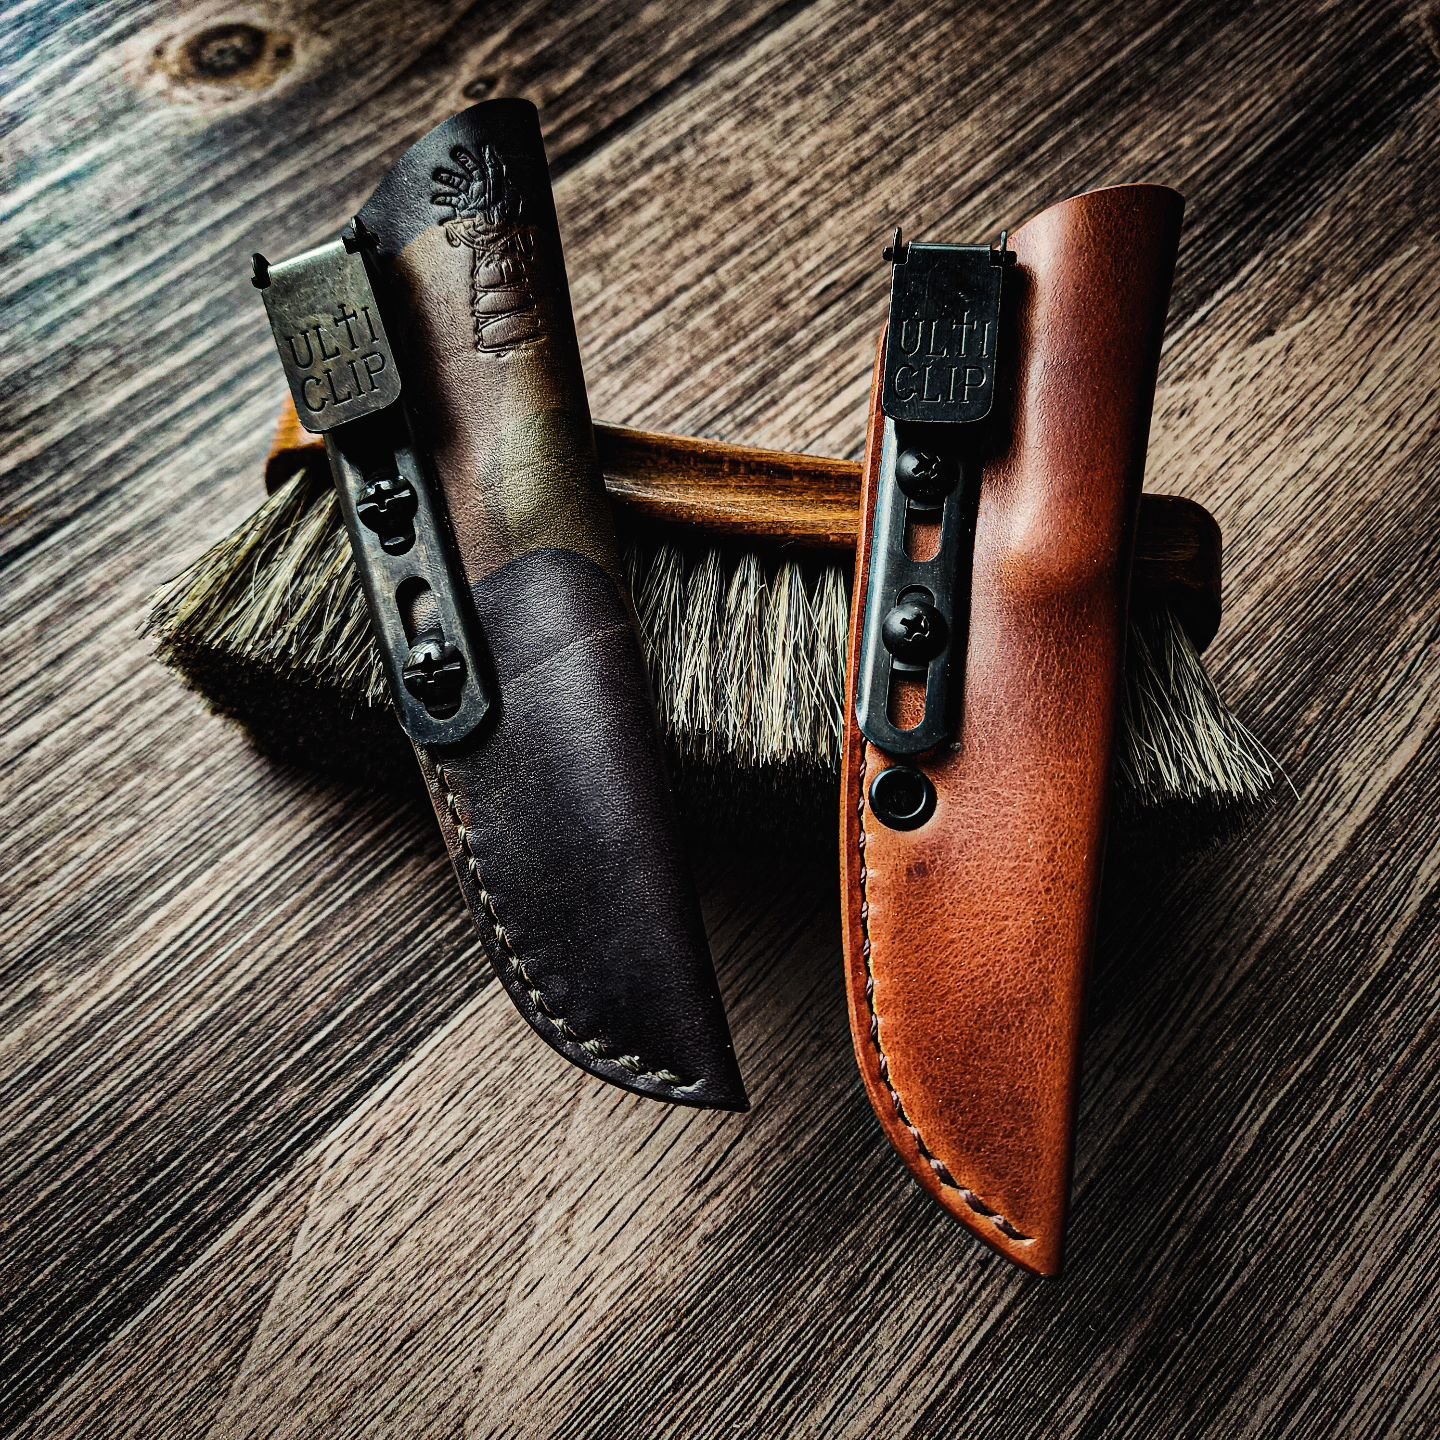 Based on the last poll results, the next pionero sheath variant will be handcrafted using Black Leather. Still debating if they should all be handstitched with Black thread, or give the buyer the option to choose thread color. 

At the moment, Black 